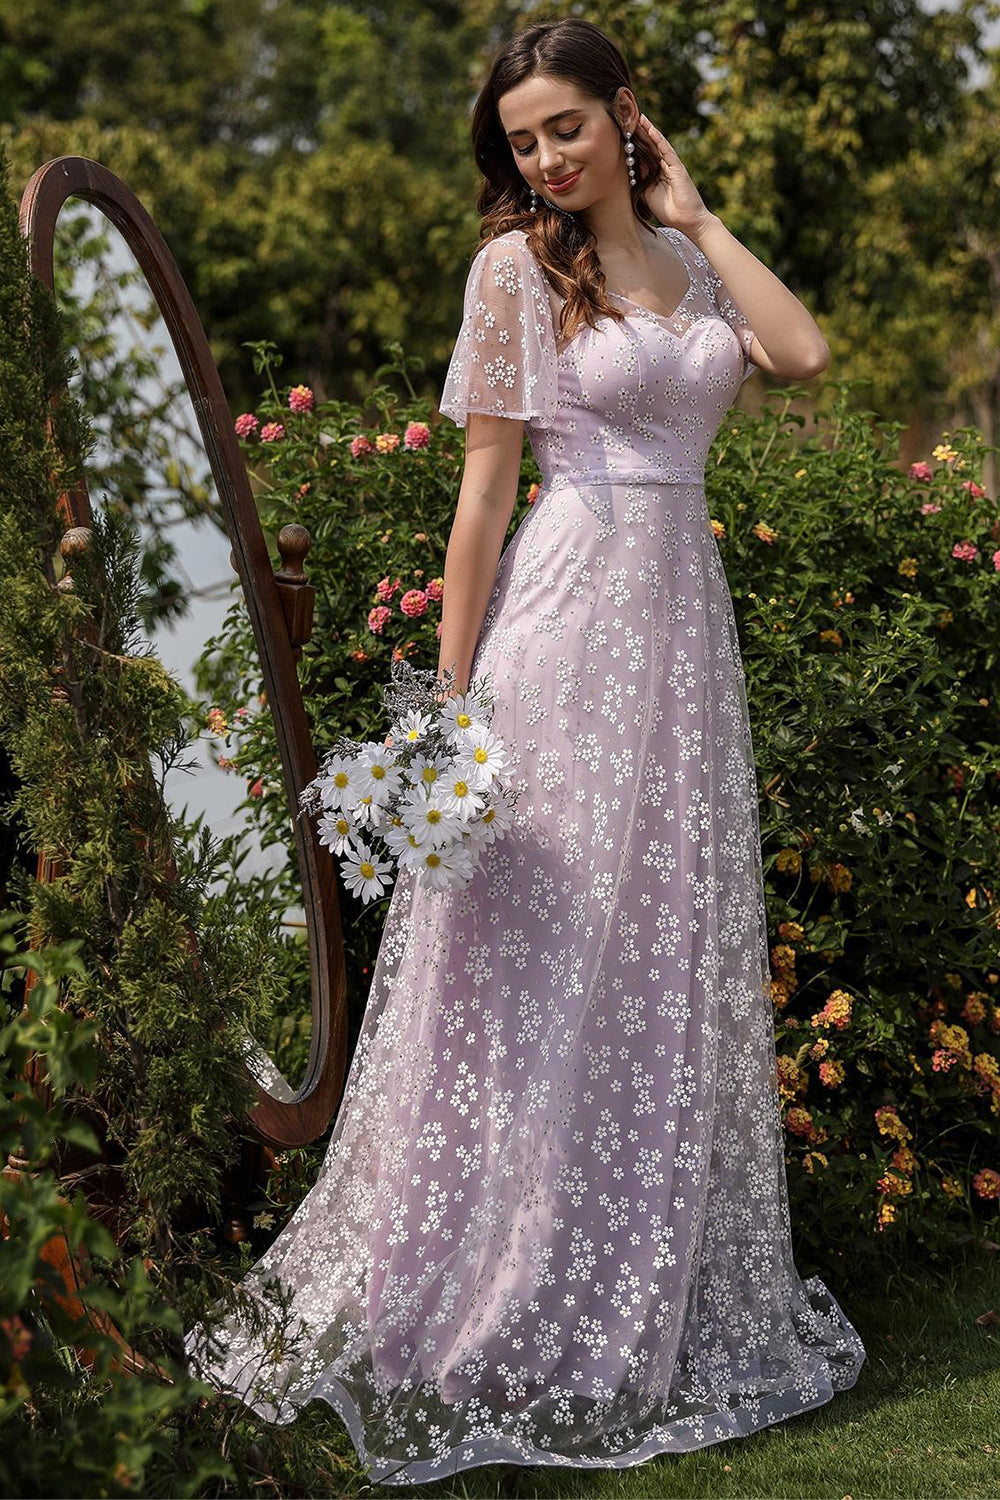 Lilac A line Tulle Prom Dress with Floral Print